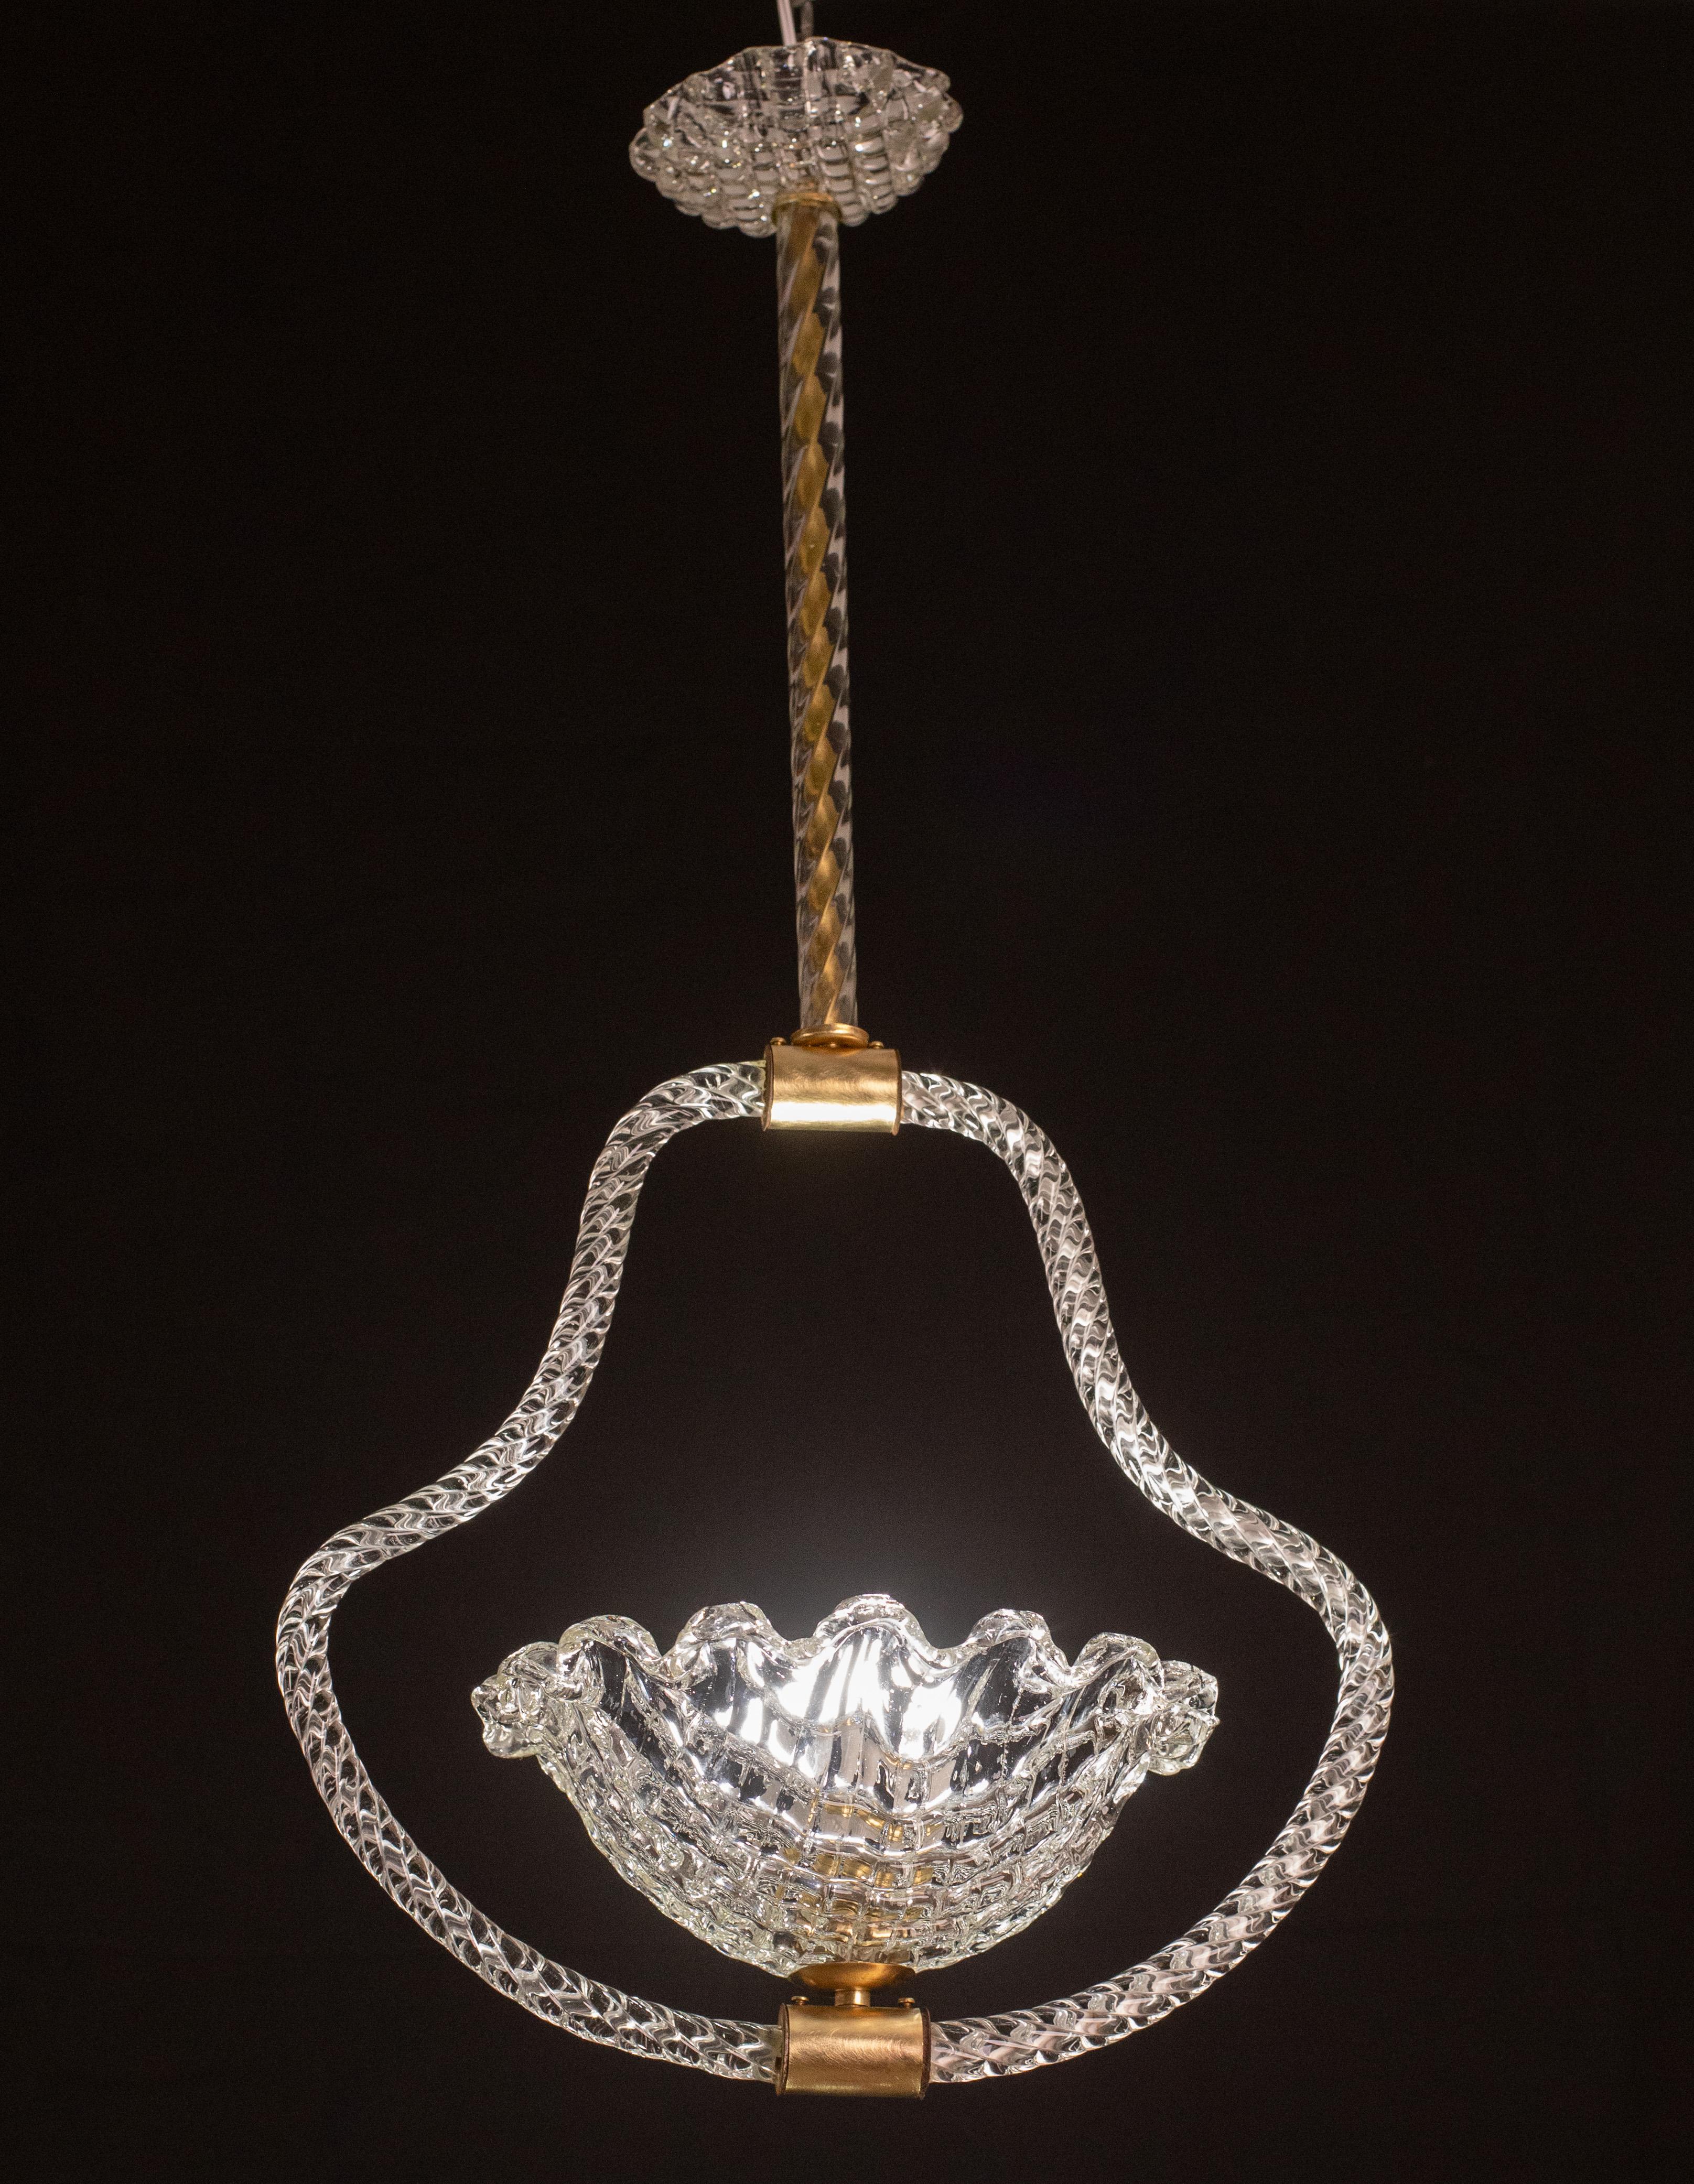 Elegant chandelier attributed to the Barovier e Toso glassworks.

Design period: 1930\1950.

The chandelier consists of a long central element and a glass bowl

The glass panes are in perfect condition.

Height 80 centimetres, width 40 centimetres.